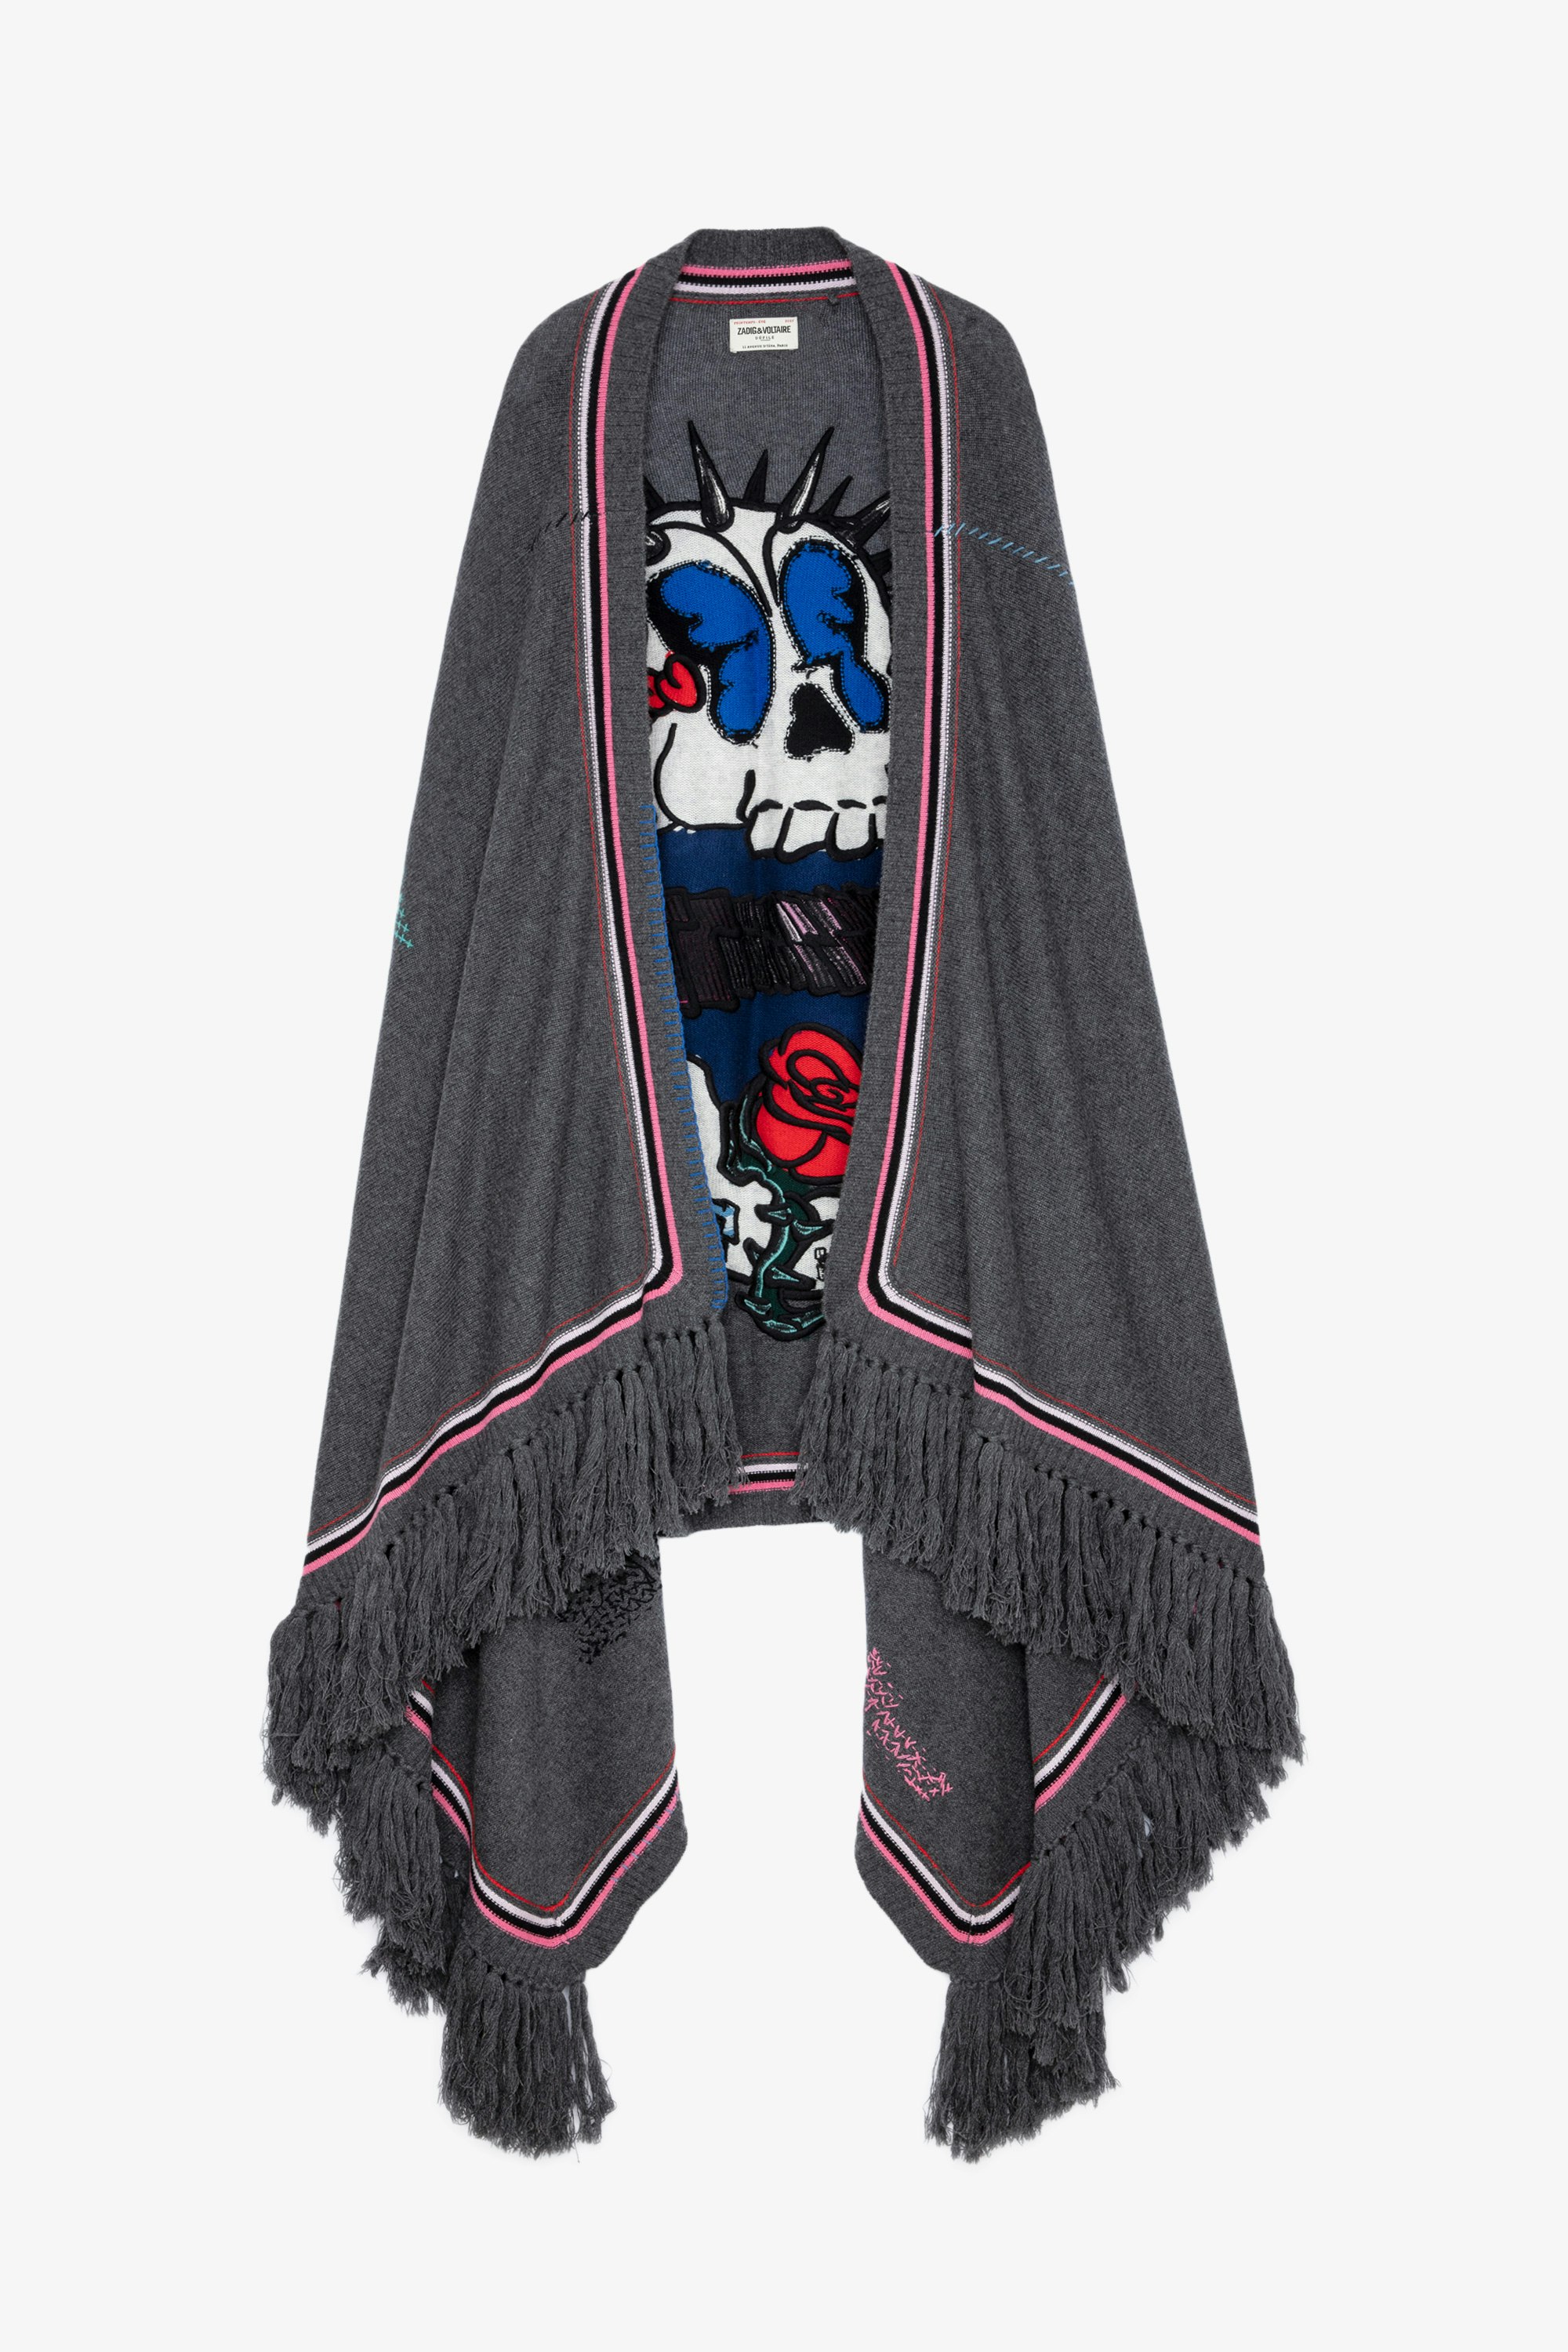 Skeleton Cashmere Coat Women’s cashmere poncho with skull print